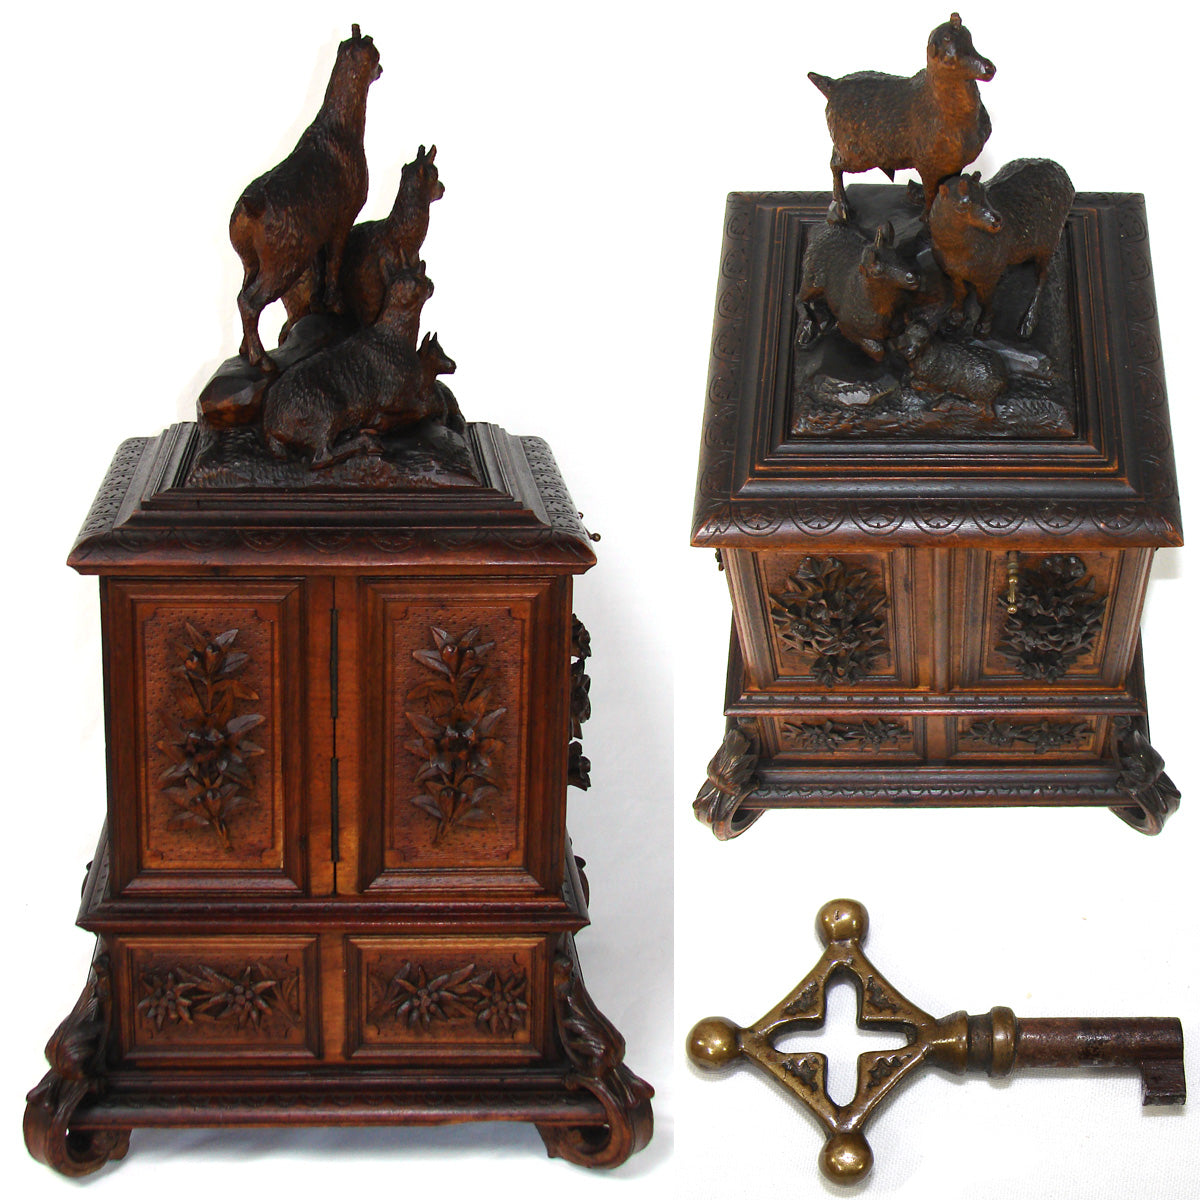 HUGE Antique Victorian Black Forest Carved 22.75" Jewelry Chest, Chamois Figures, Folding Compartments